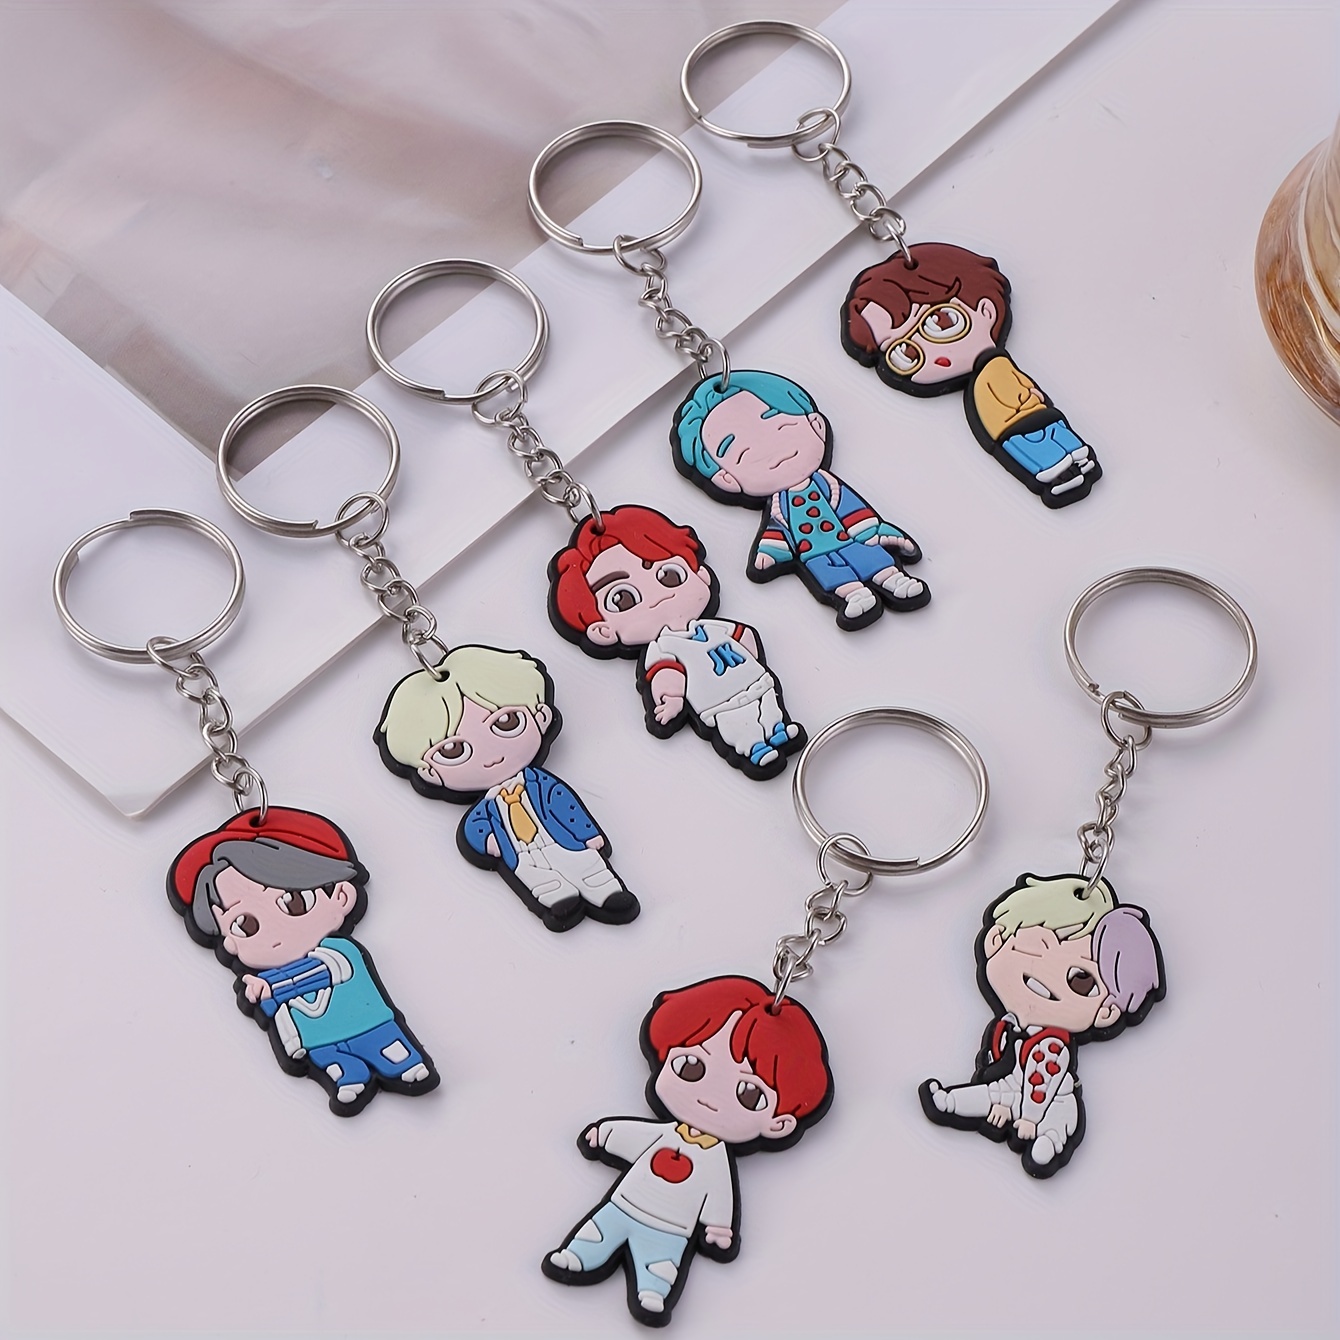 

7pcs Kpop Stars Keychain Cute Kawaii Key Chain Ring Purse Bag Backpack Charm Earbud Case Cover Accessories Women Daily Uses Fans Gift